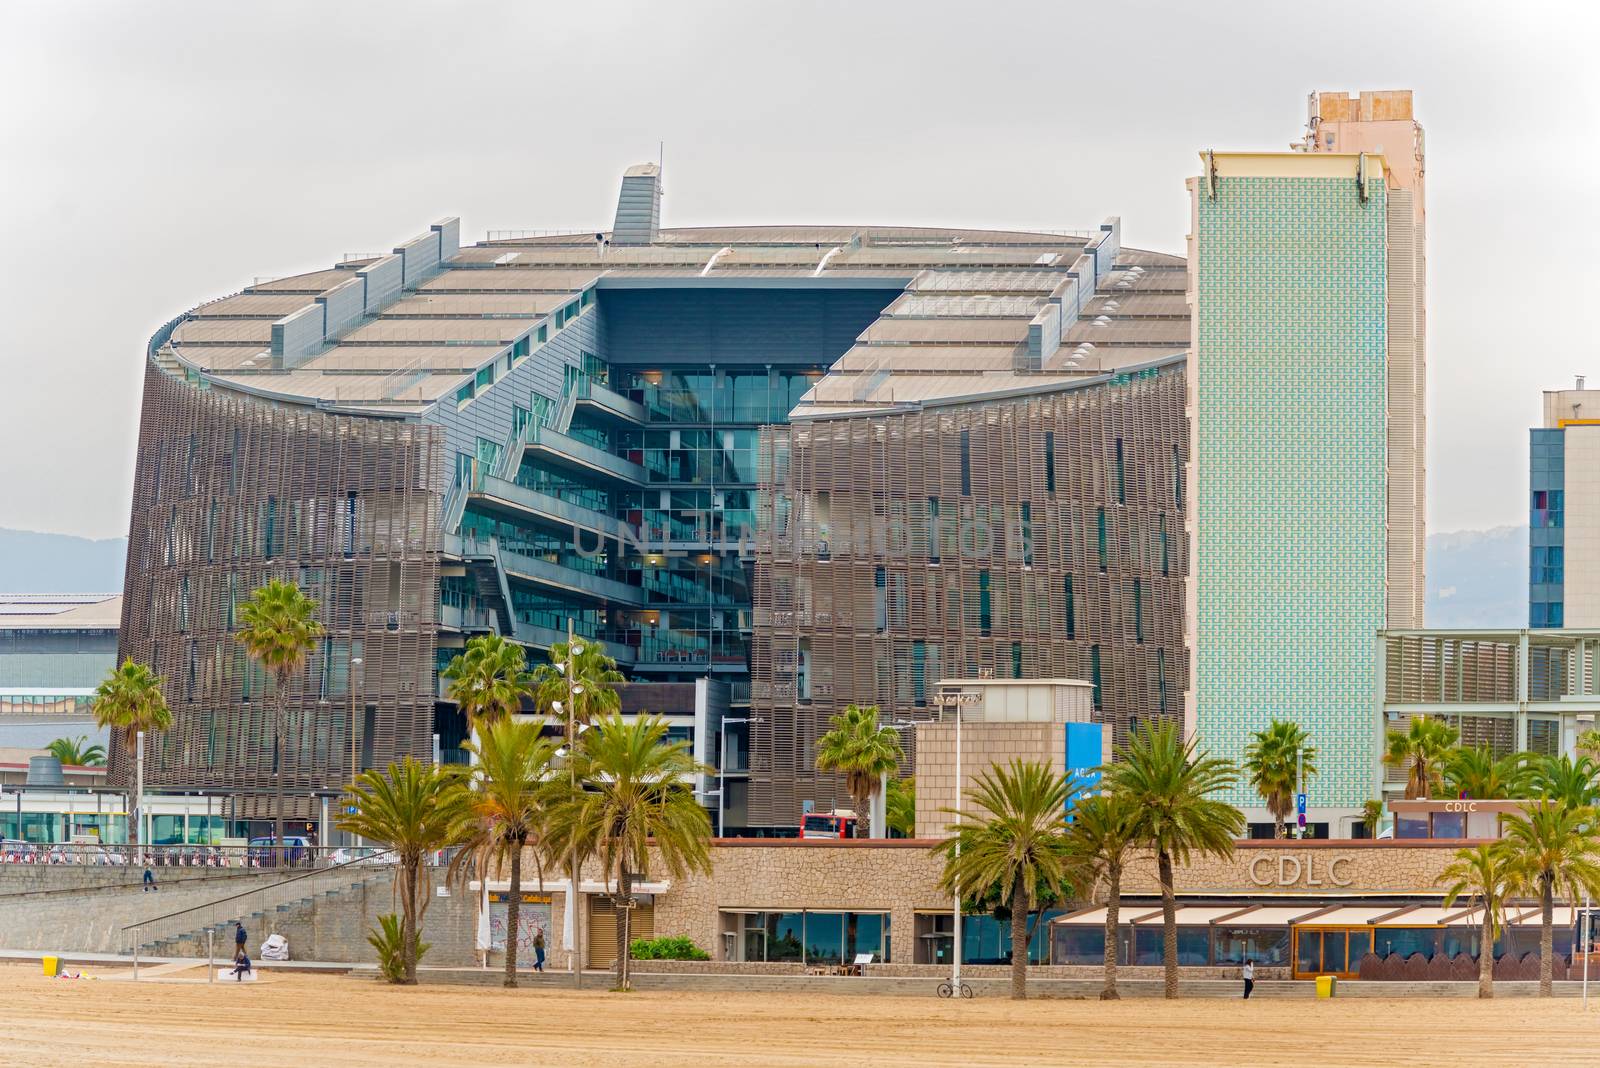  Modern architecture at Barcelona Olympic Port, Spain  by Marcus